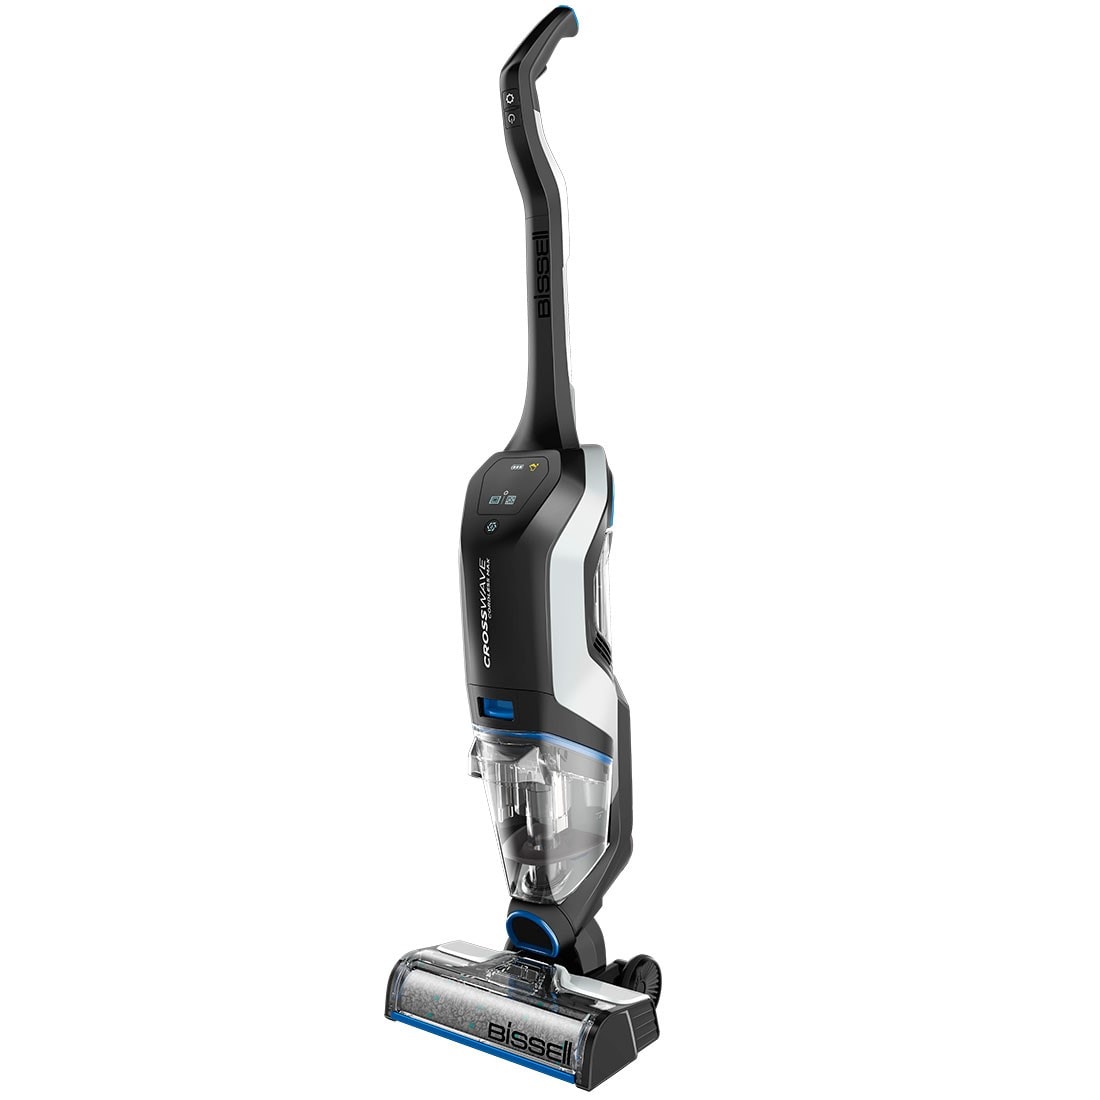 Bissell crosswave cordless max - nettoyeur multifonction BISSELL 5652